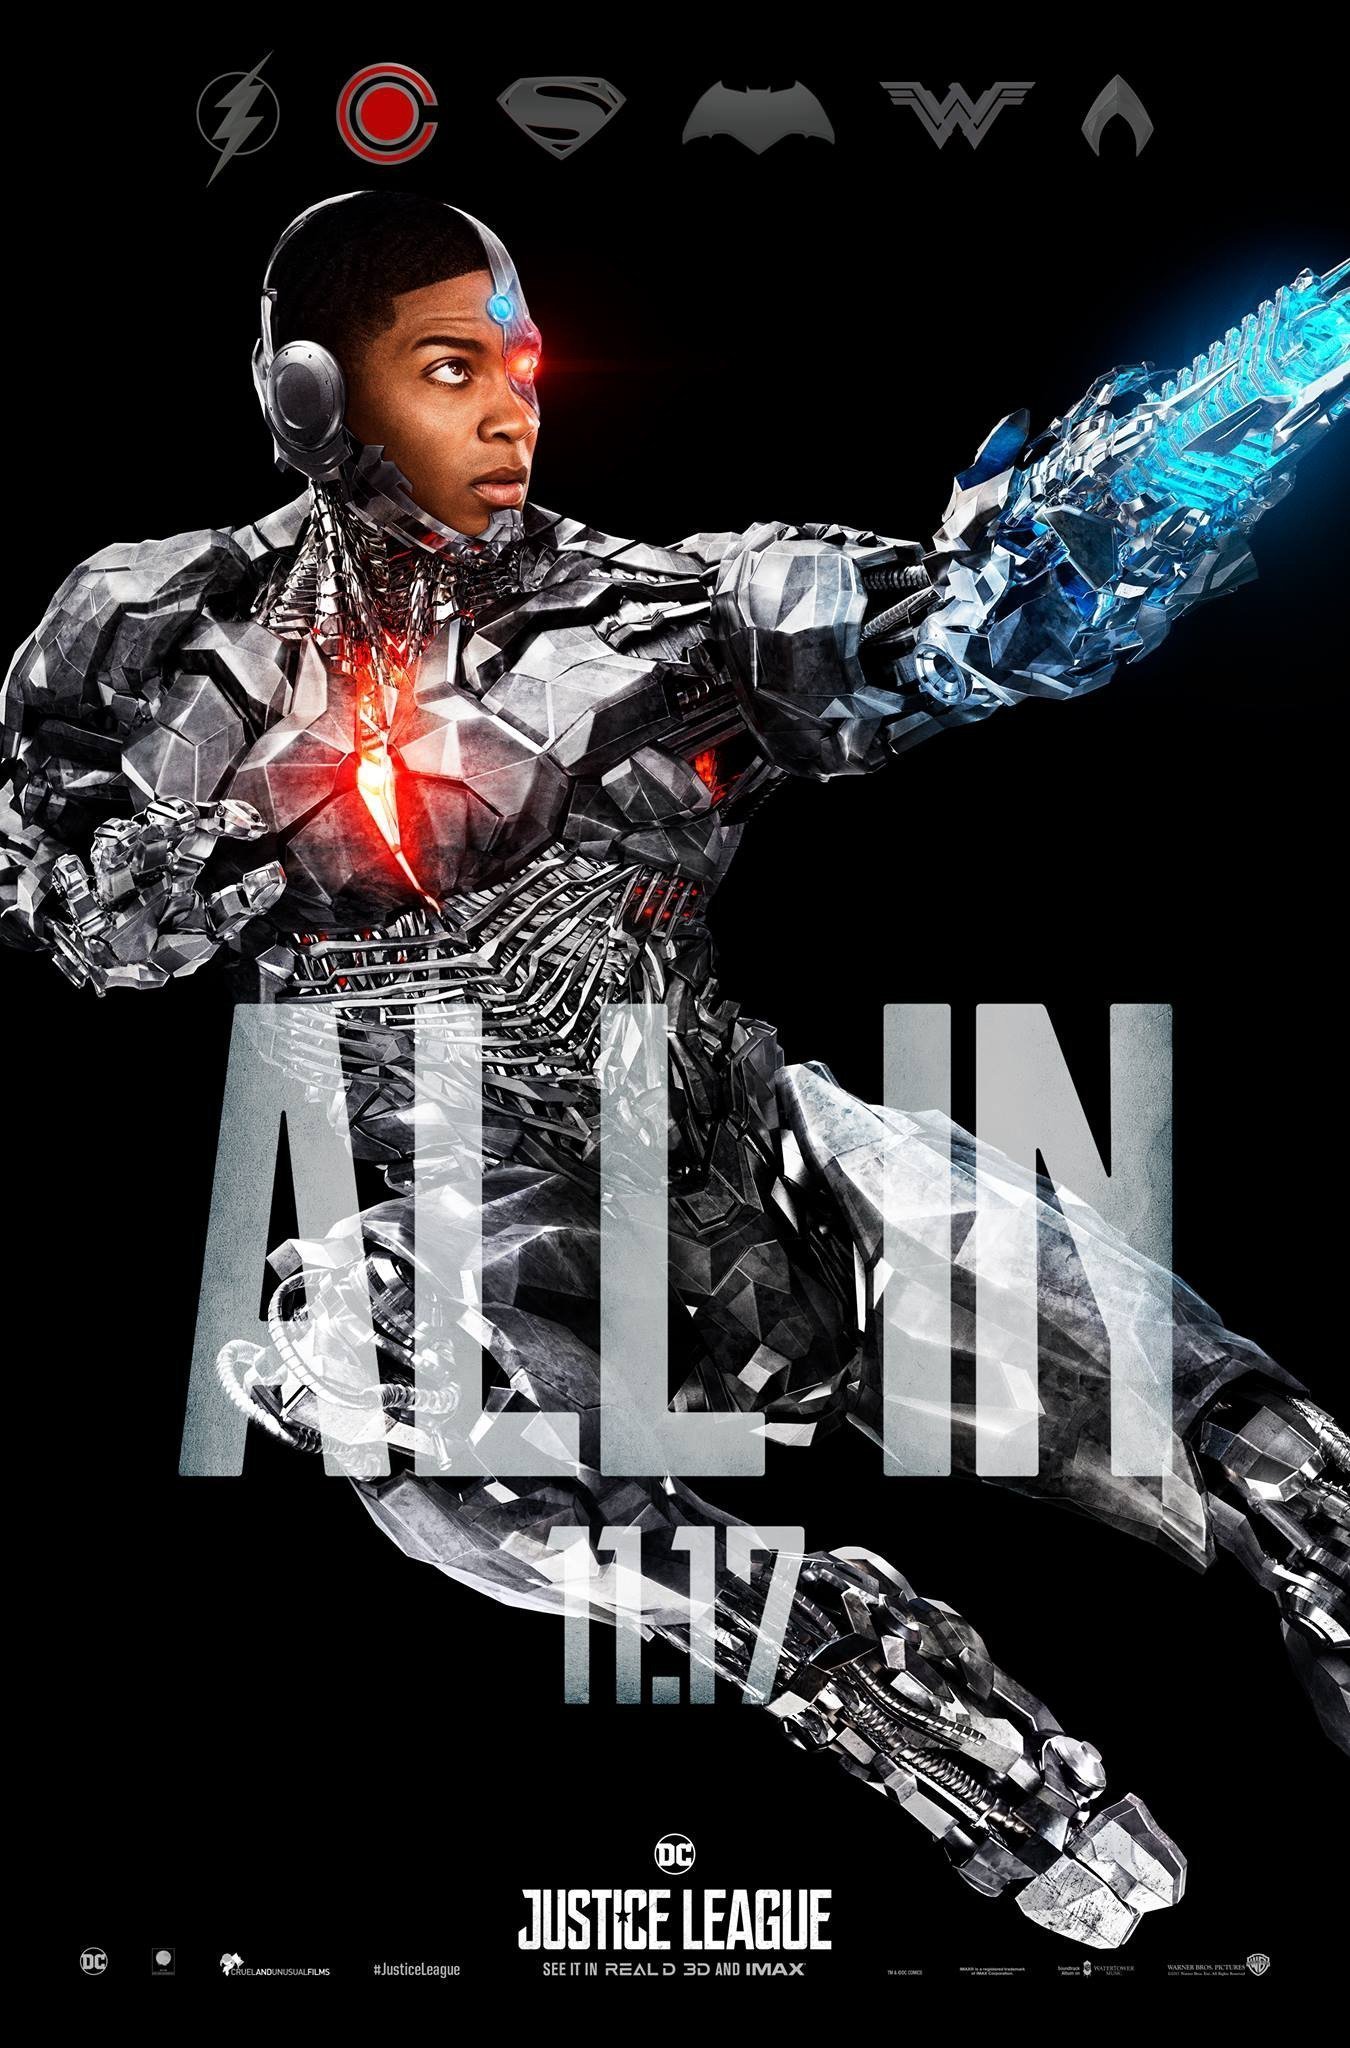 Poster "All in" du film Justice League avec Cyborg